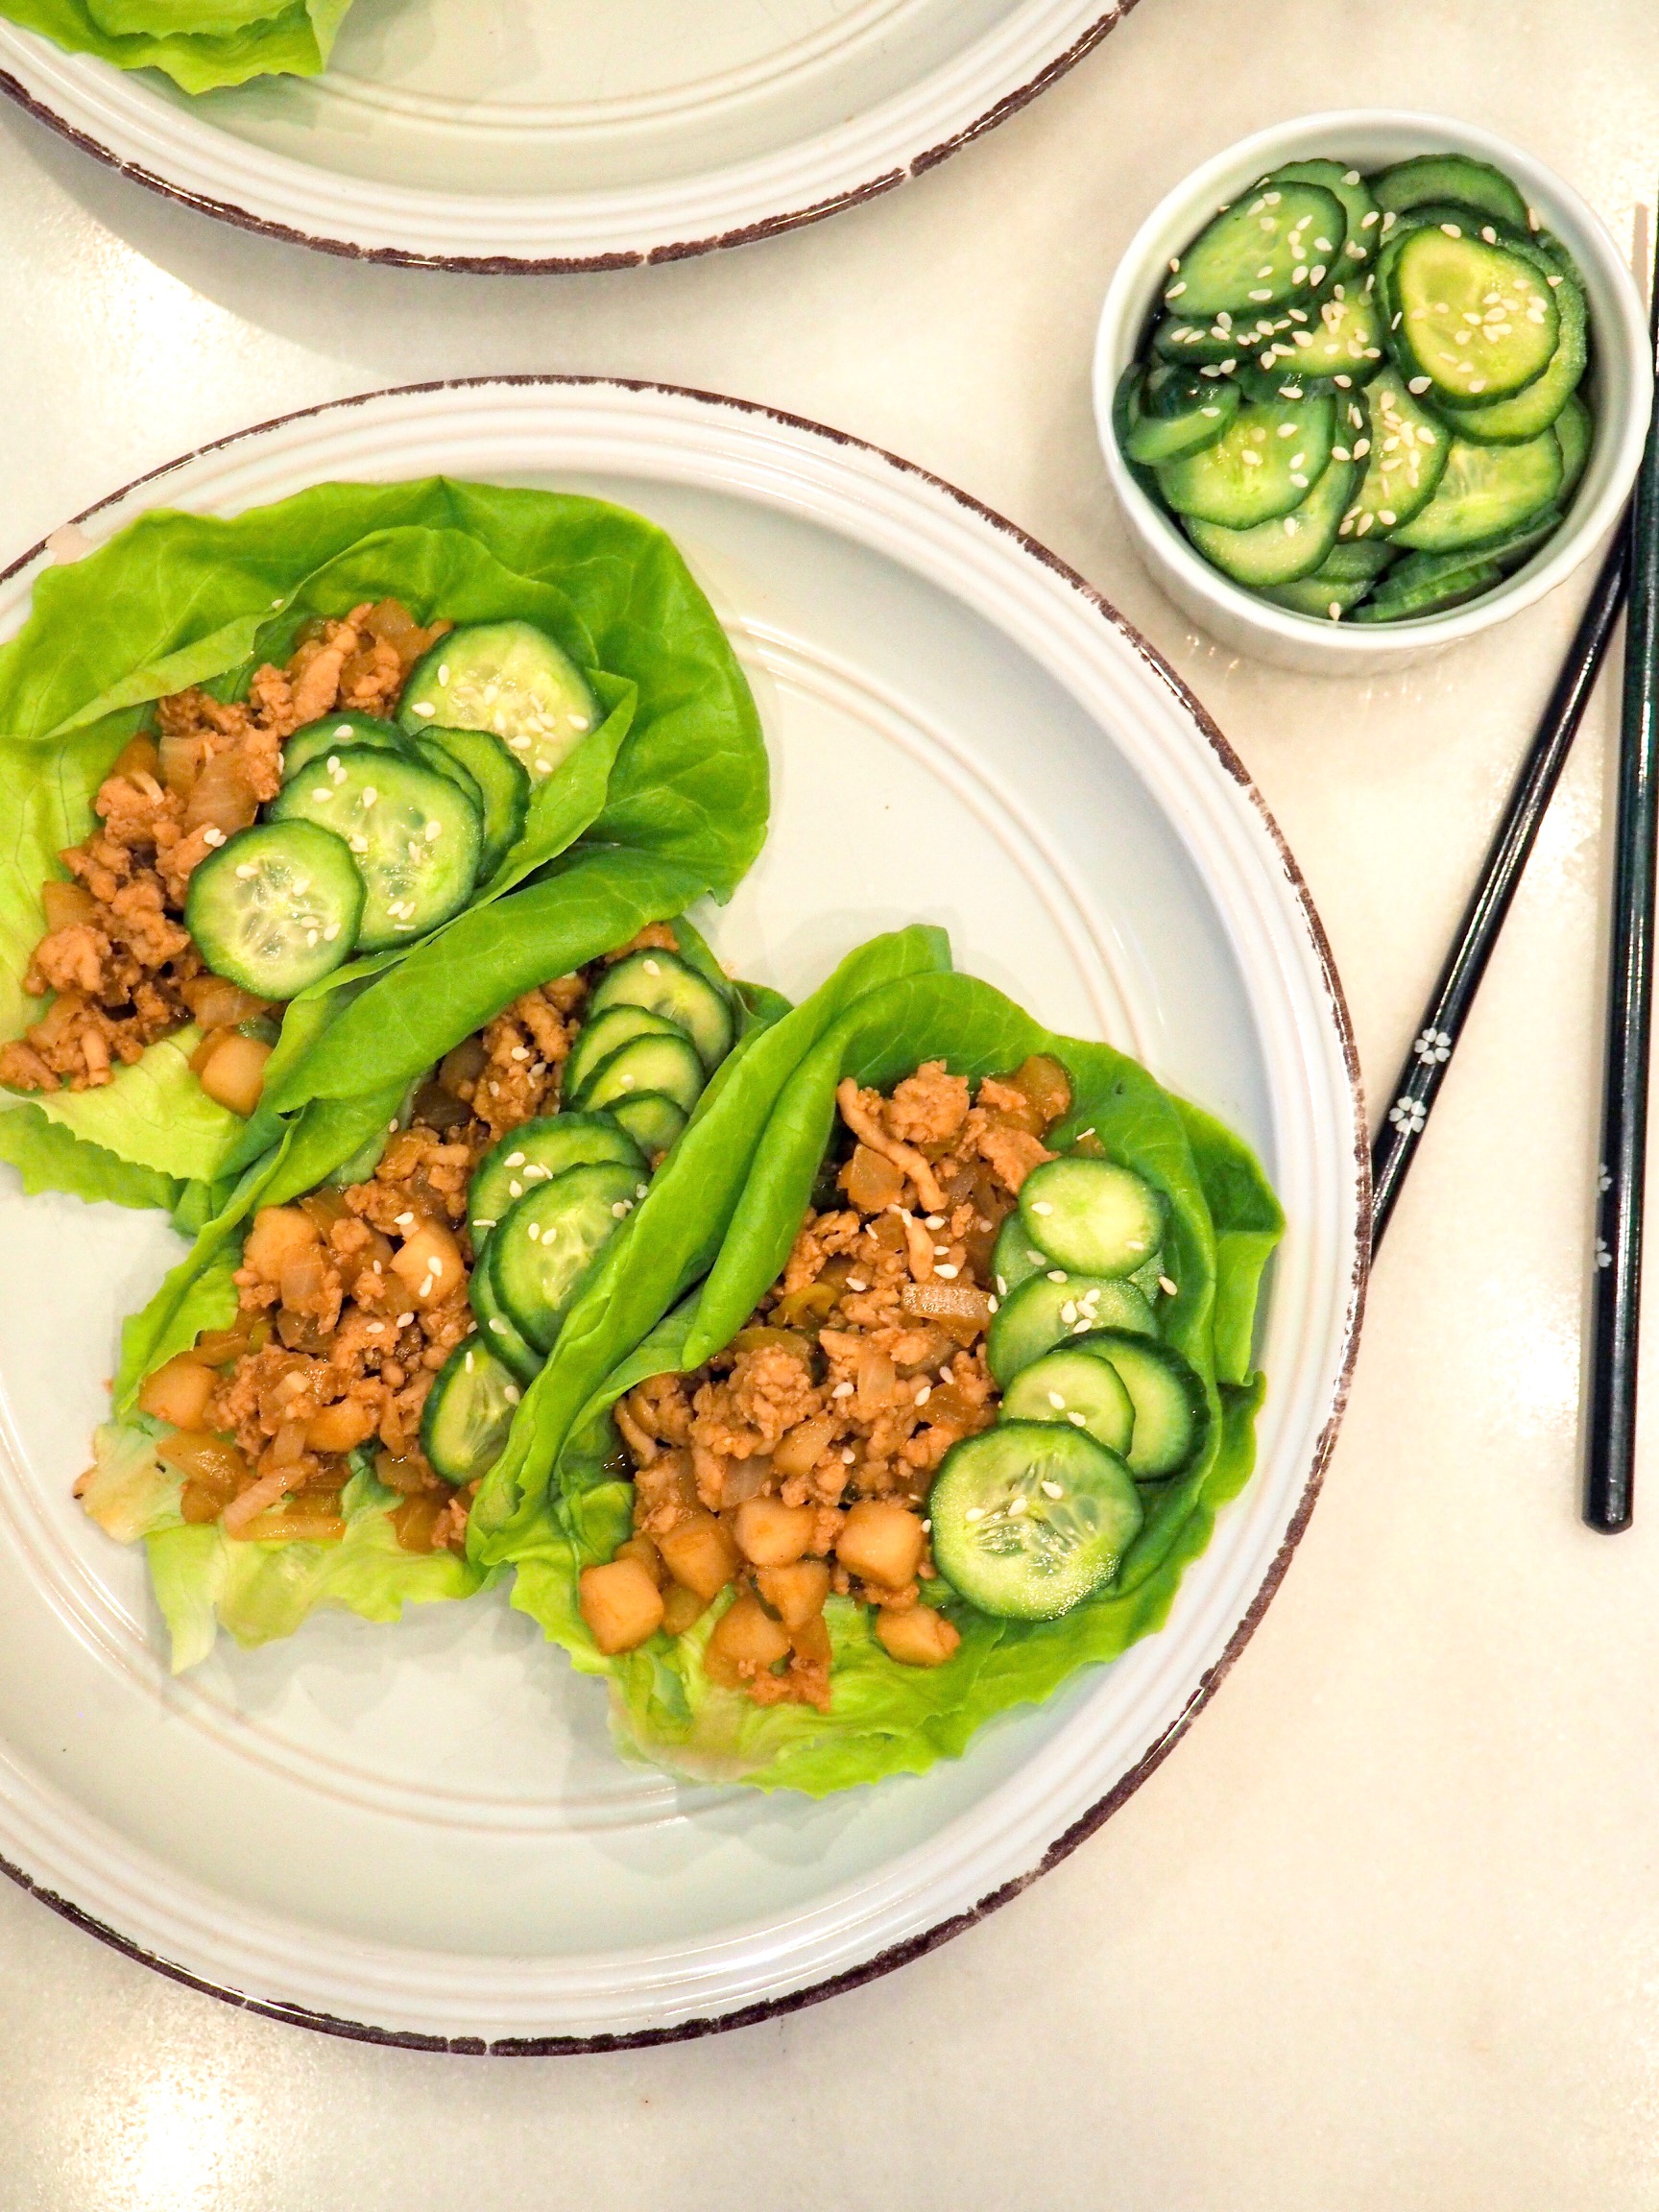 Chicken Lettuce Wraps with Cucumber Salad